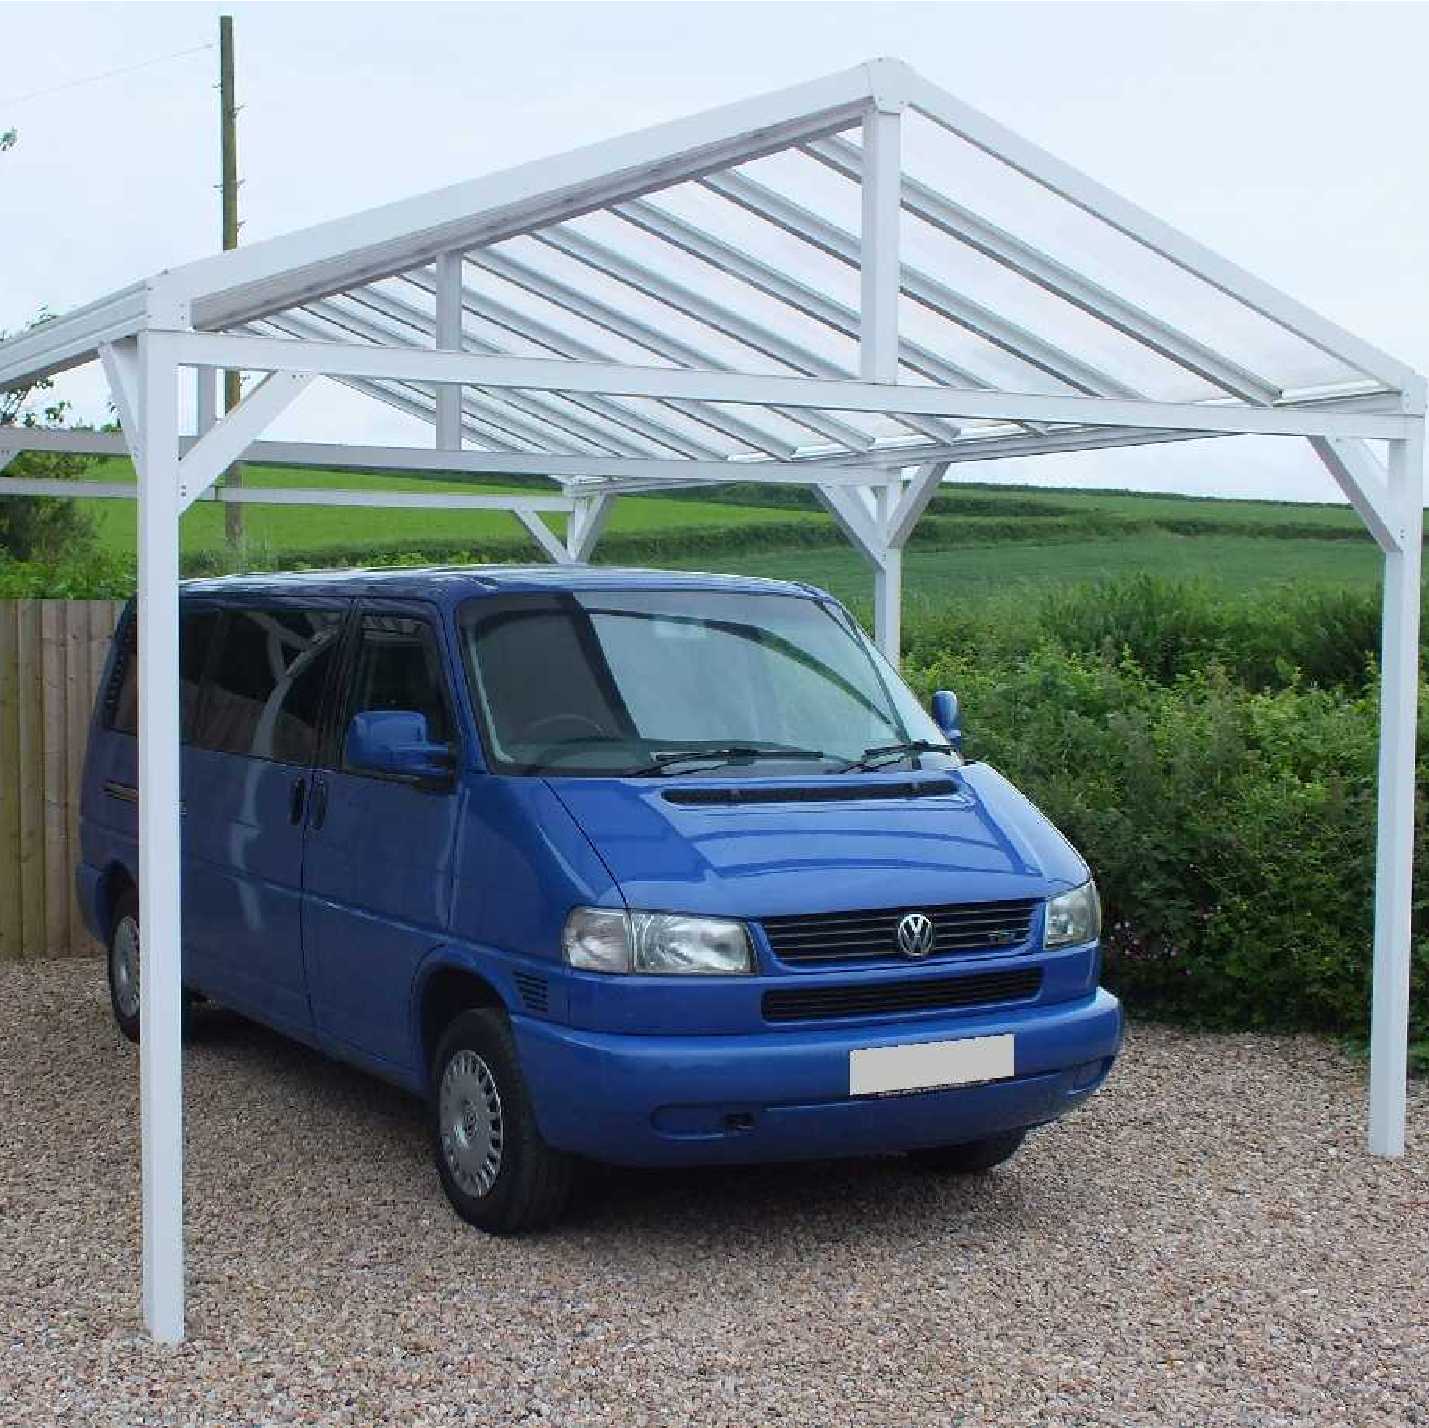 Omega Smart Canopy - Free Standing with Gable Roof (type 1)